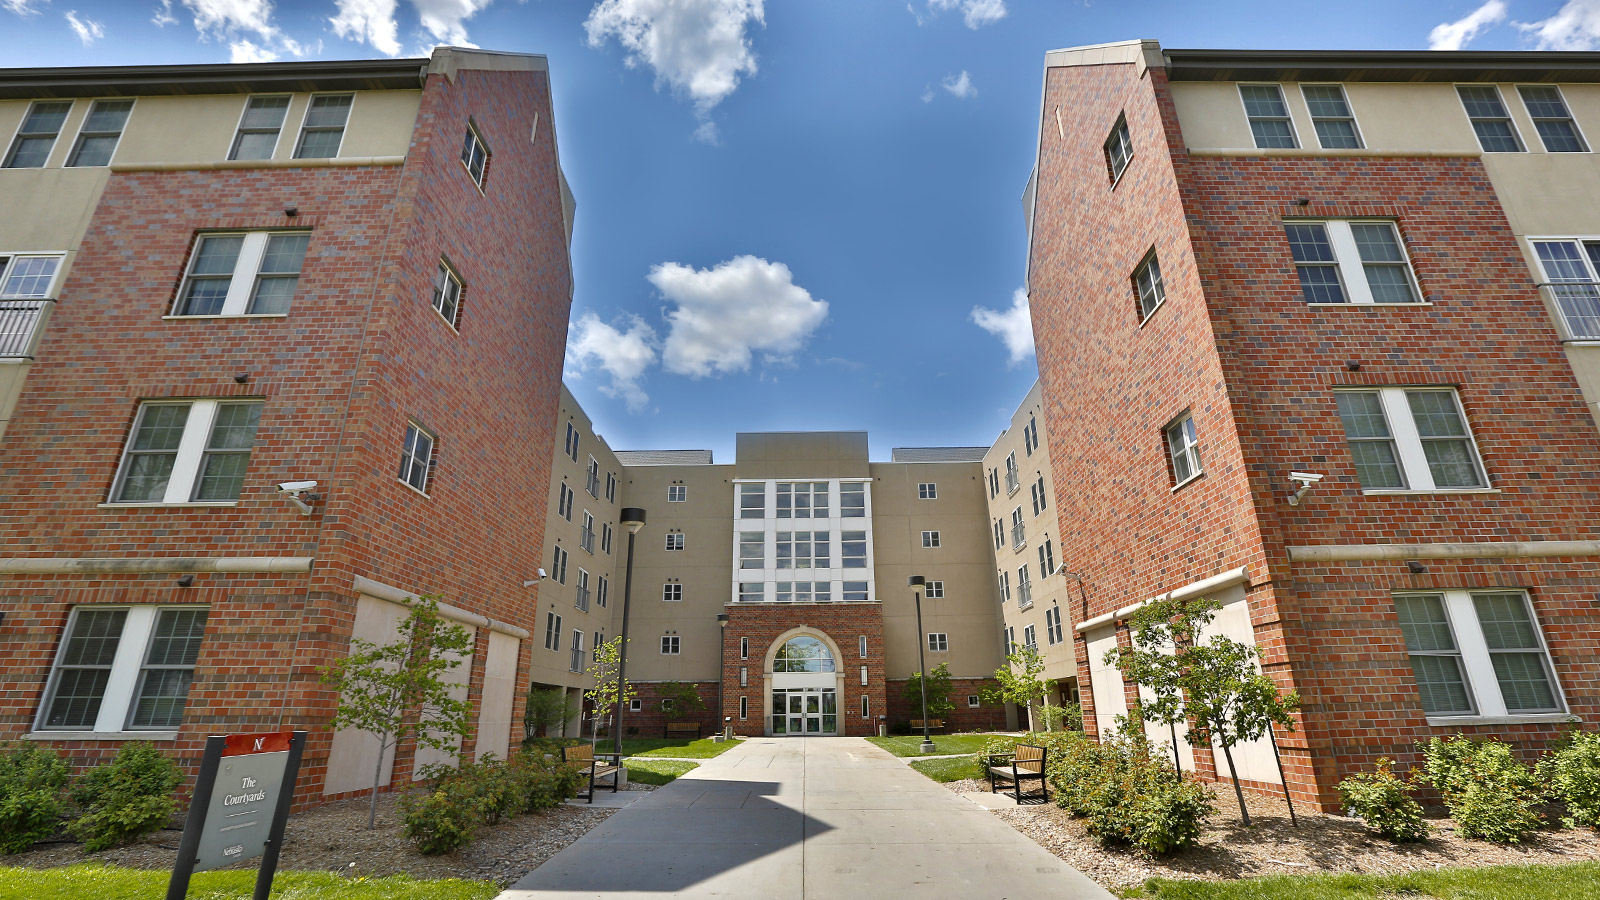 The Courtyards, an apartment-style residence hall on City Campus, offer the convenience of on-campus living with a more independent living environment.